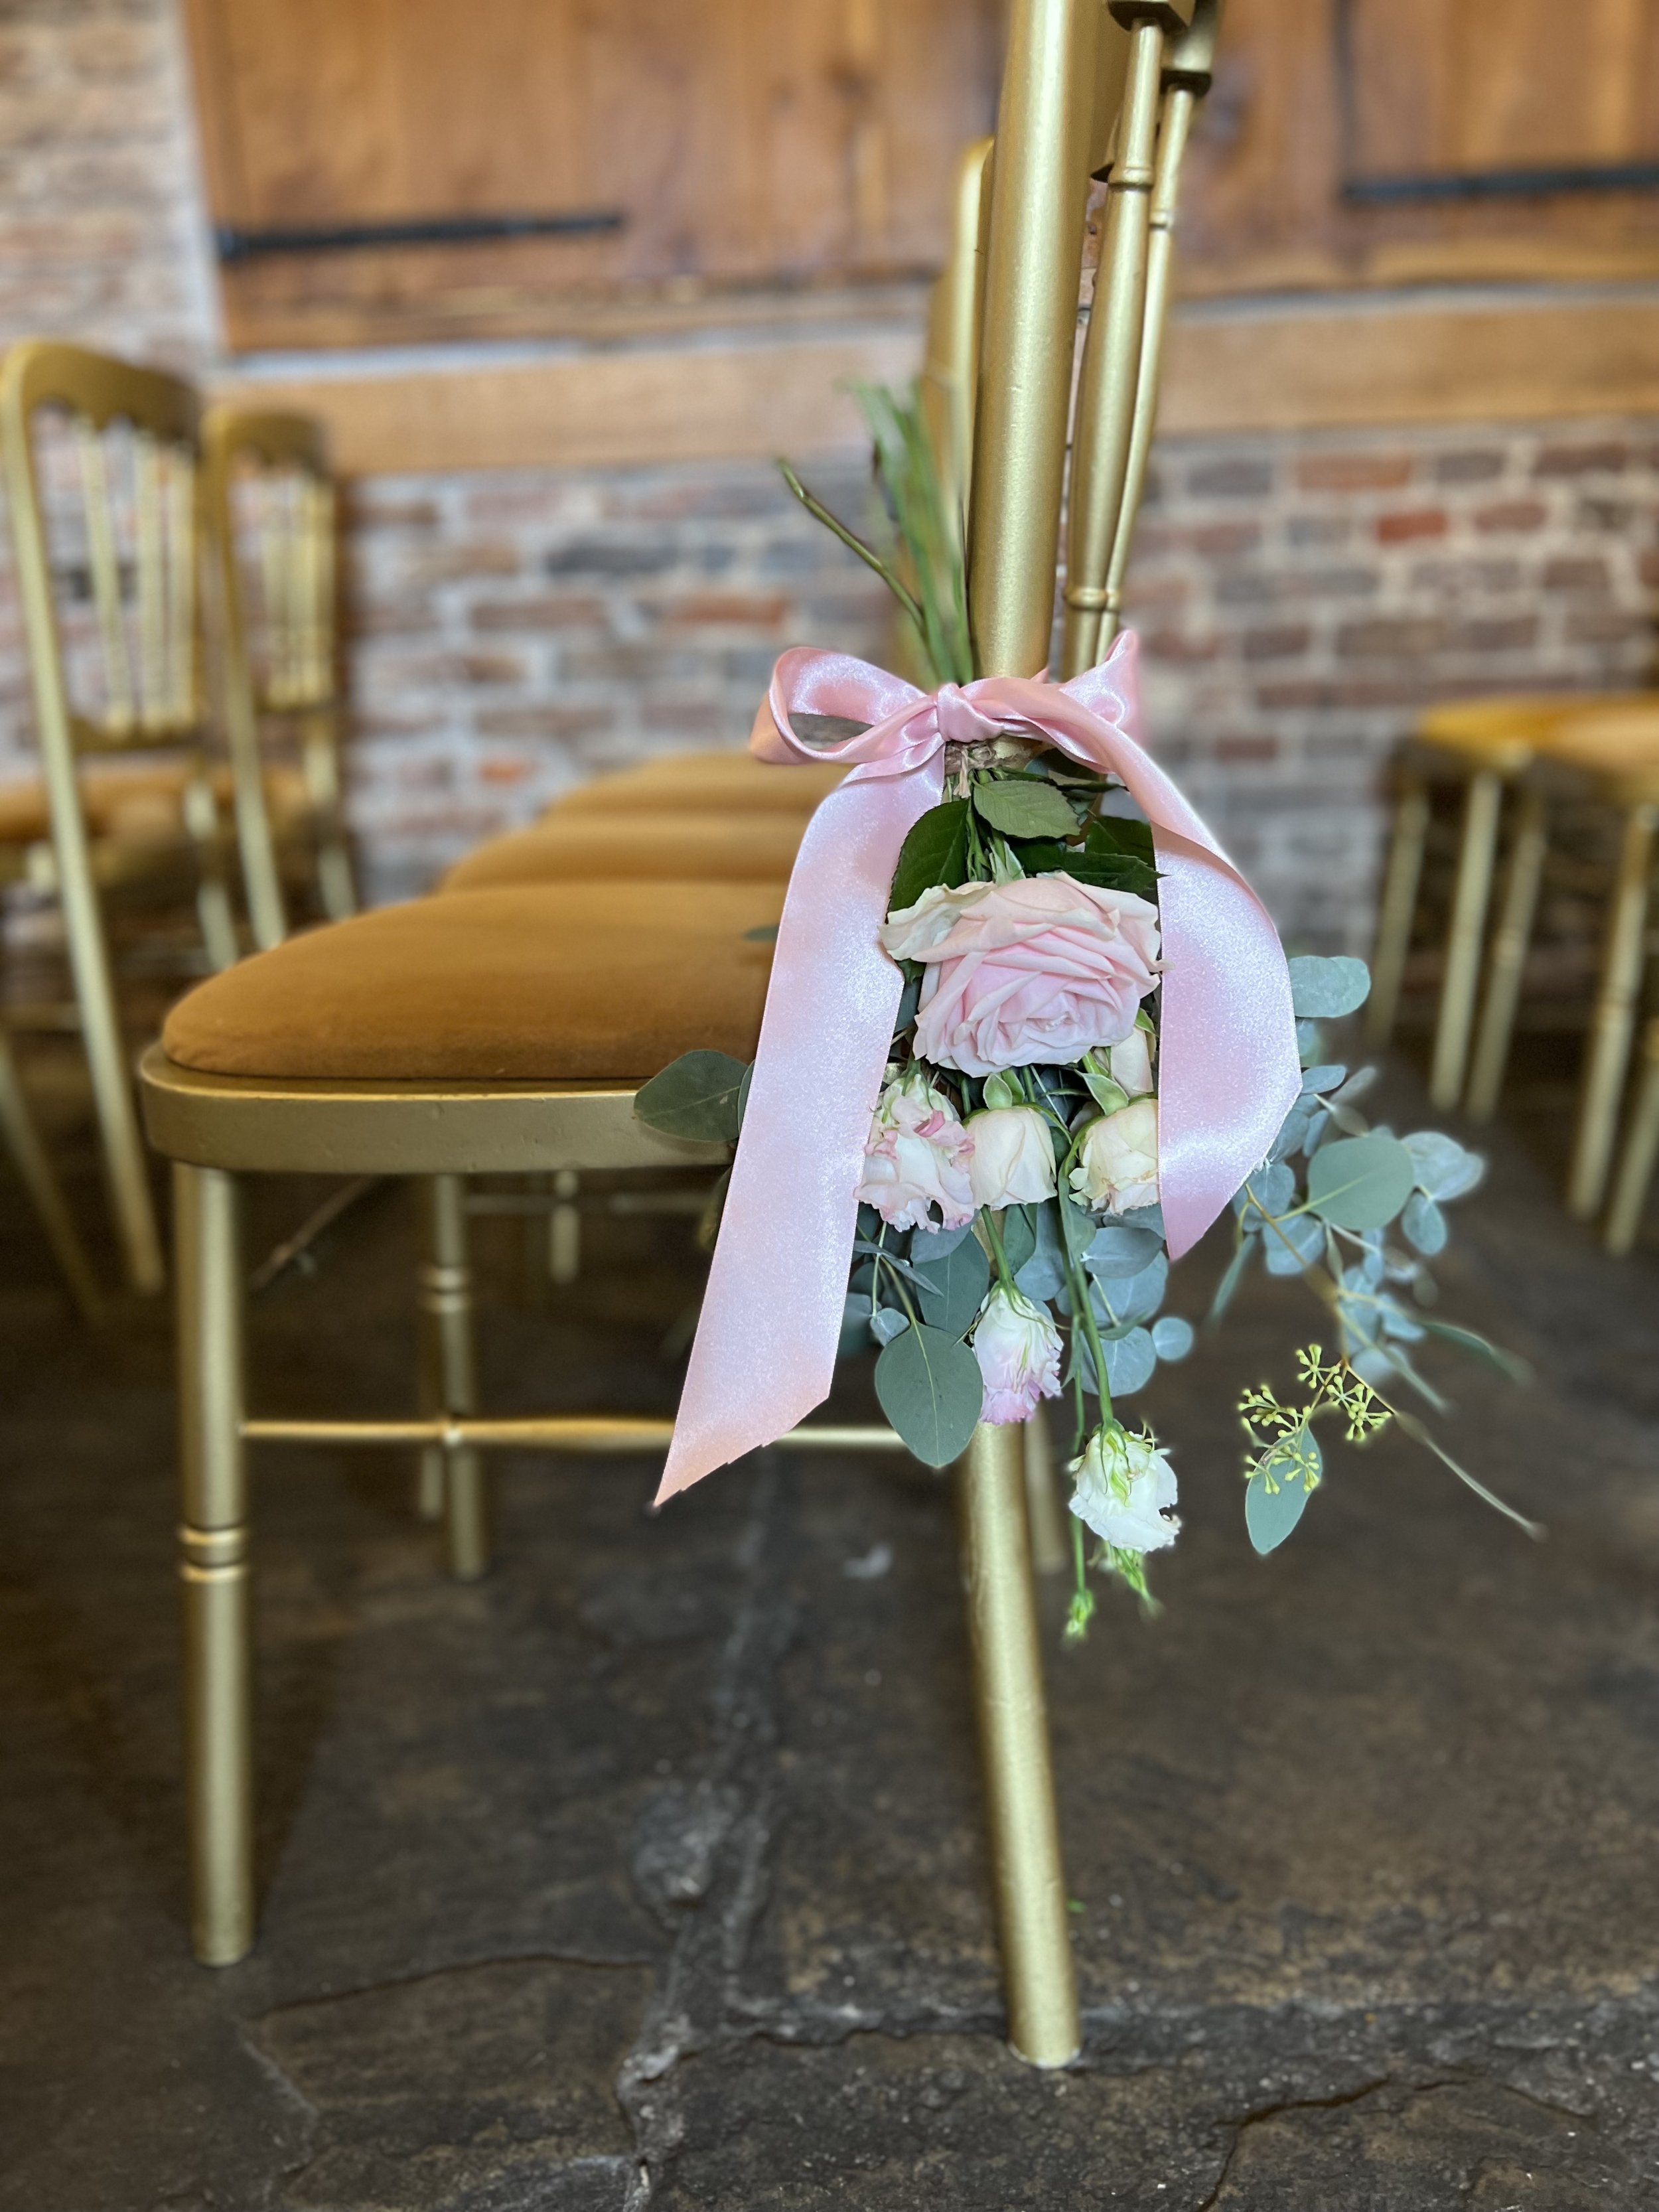 Aisle decoration, tied bunches on the chairs